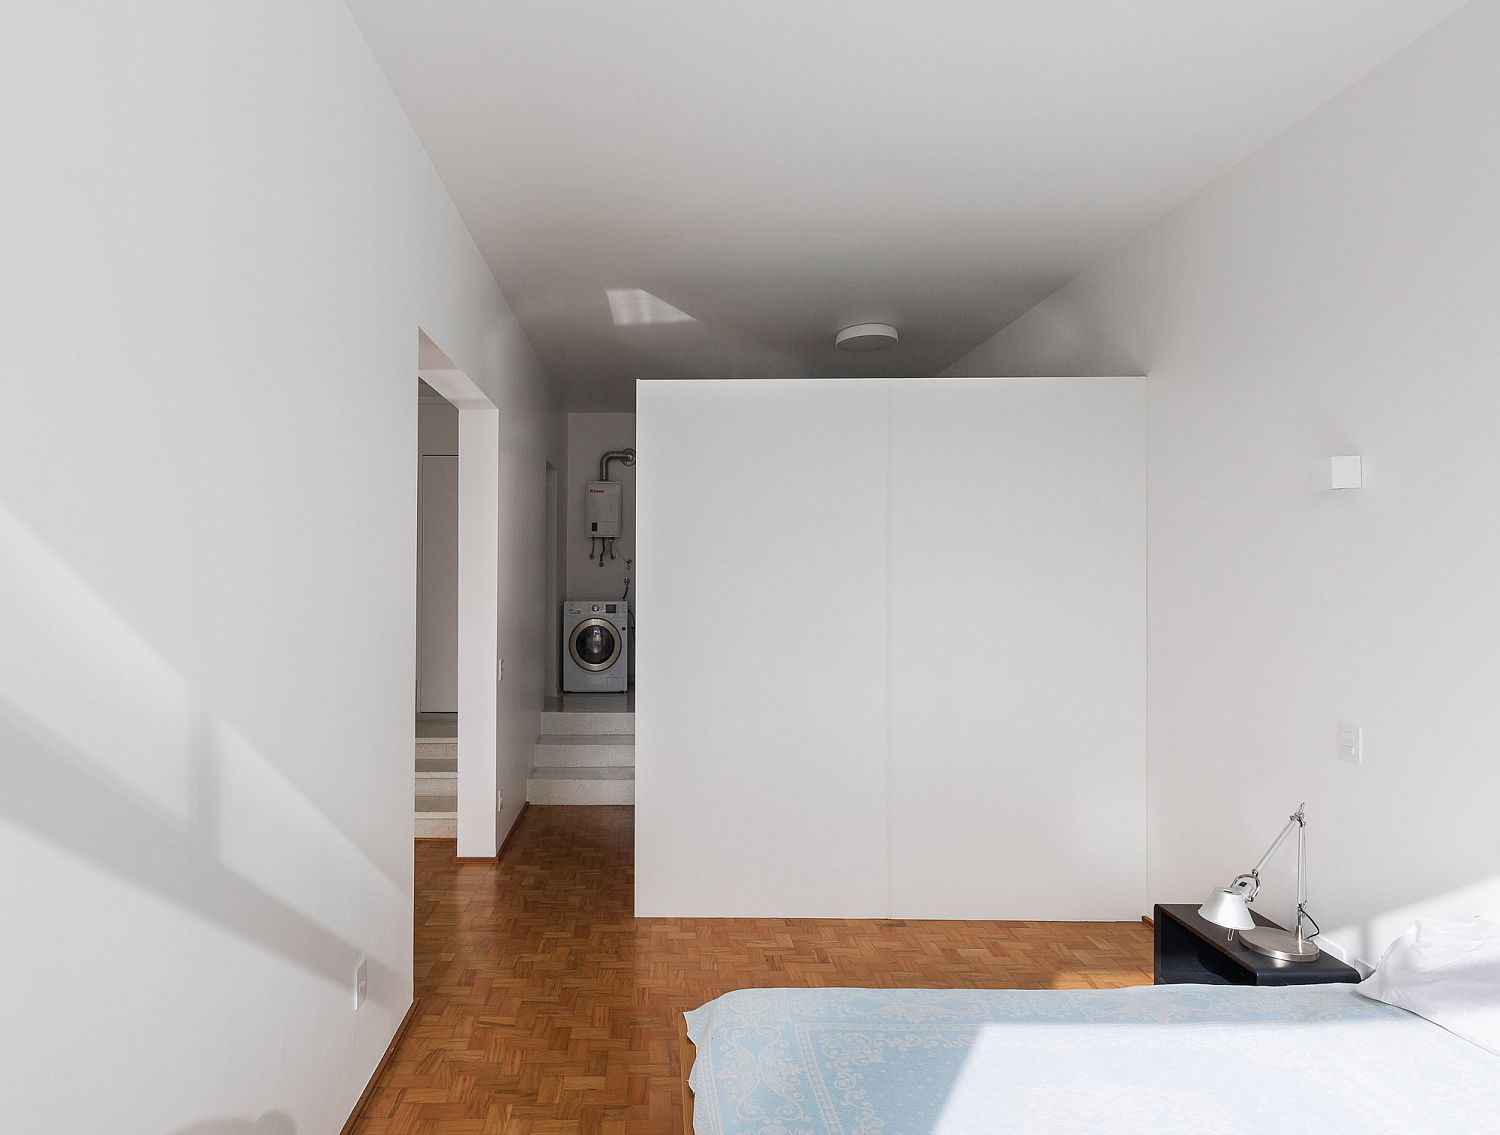 Bedroom and utility areas placed on different levels of the apartment